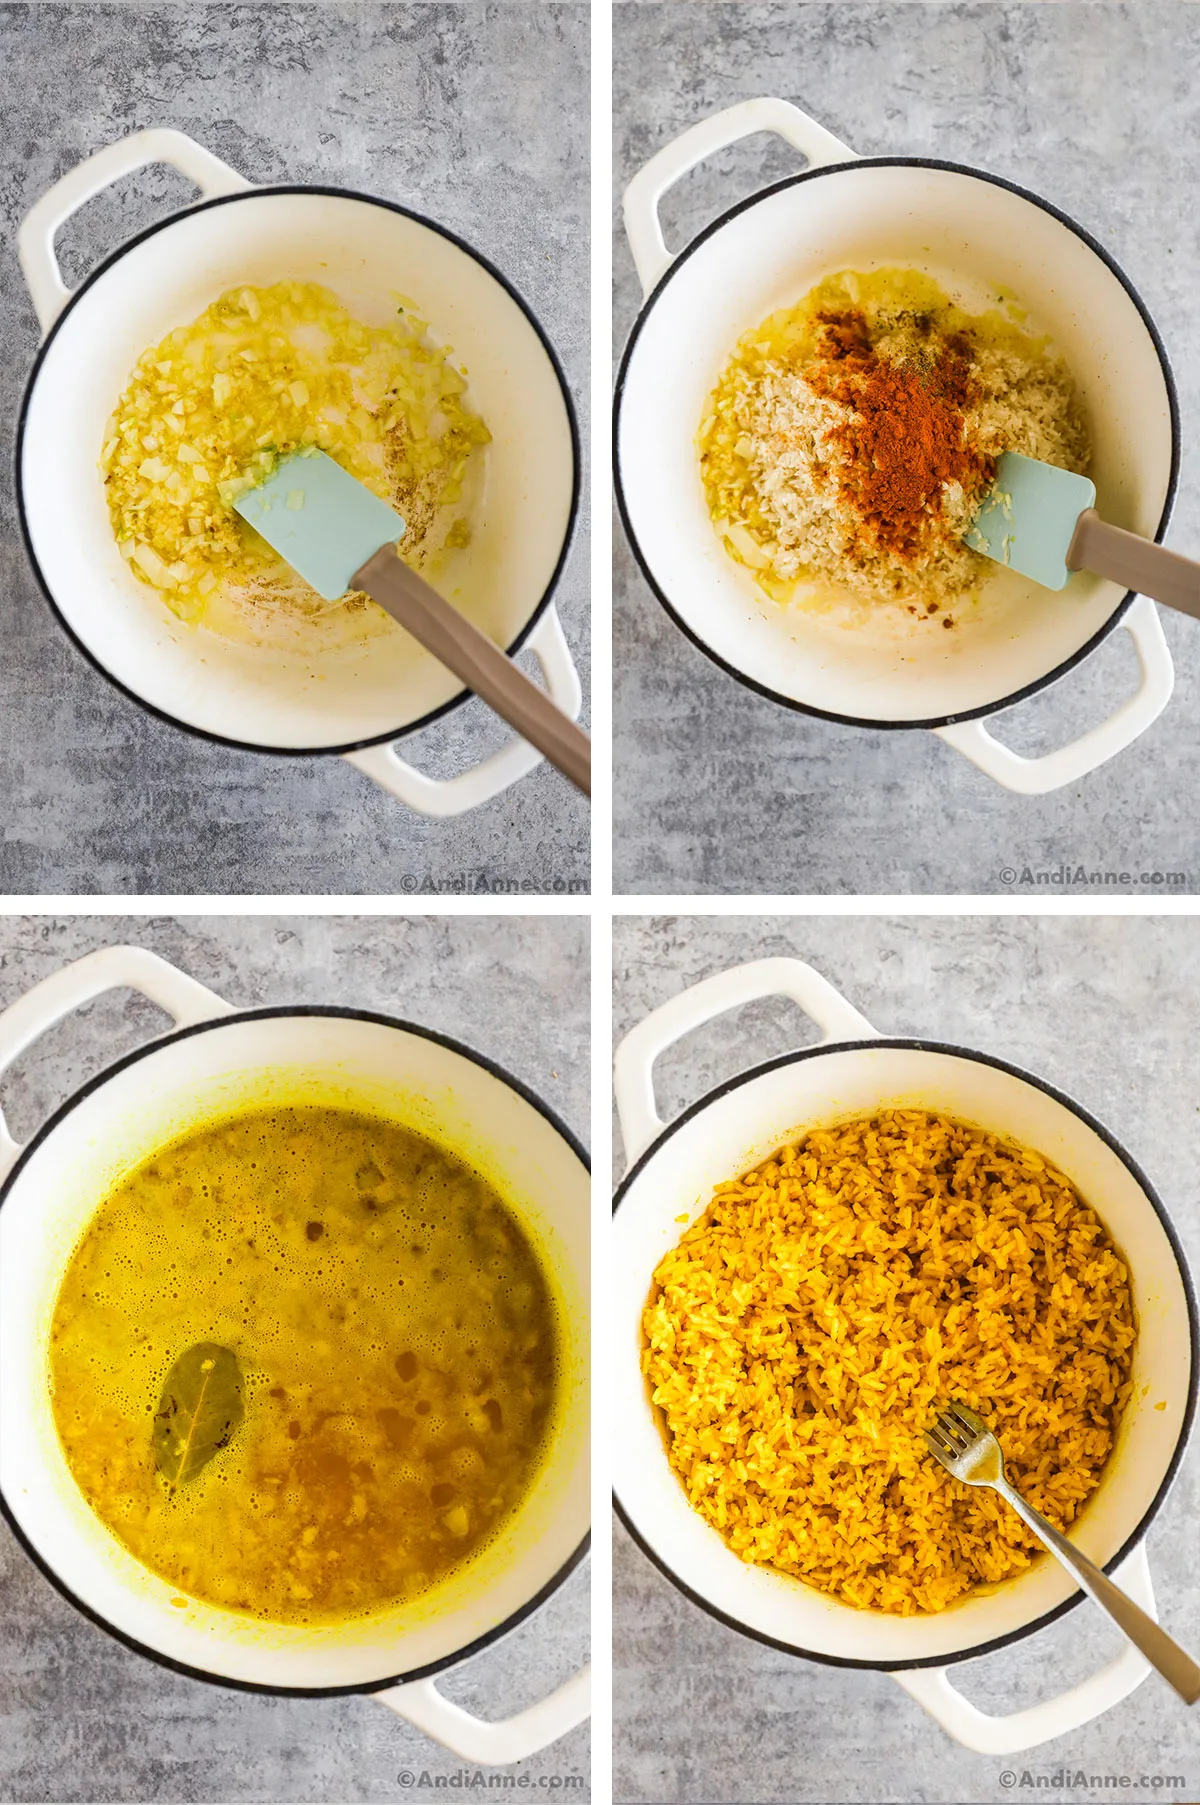 Four images together showing steps to make recipe. First is sauteed onion in a pot, second is rice and turmeric dumped on top. Third is yellow liquid with bay leaf in the same pot. FOurth is cooked yellow rice in white pot. 